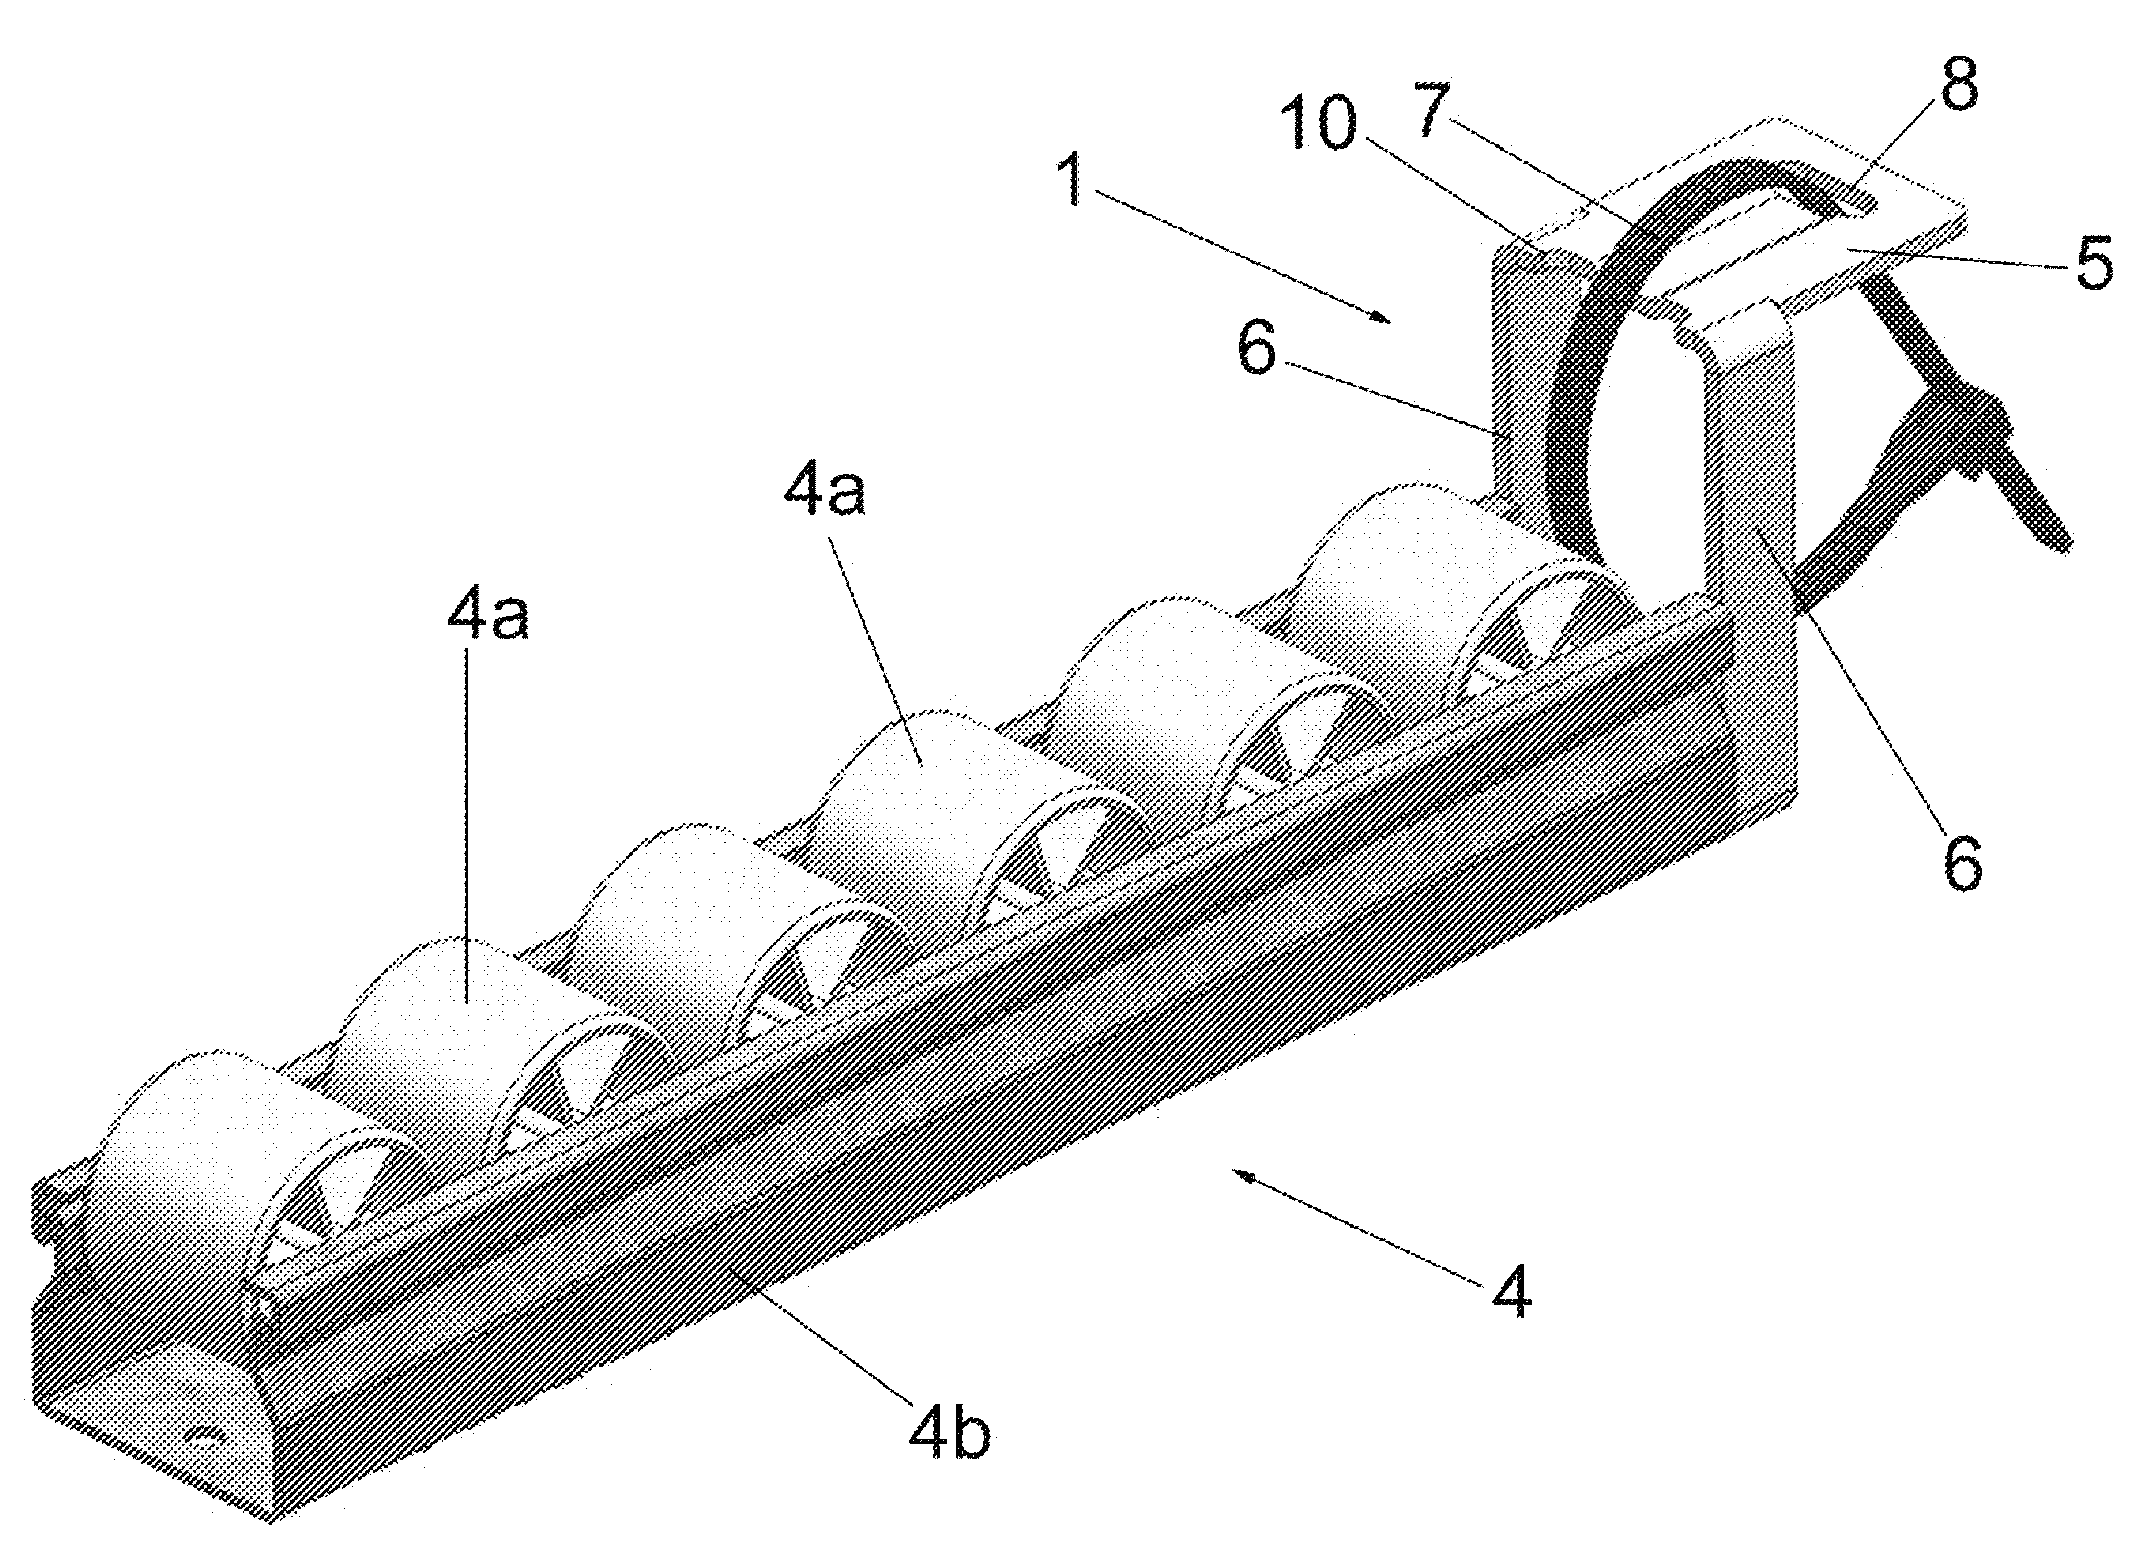 Tool for fastening a roller-way to a frame of a merchandise conveyance facility, and conveyor system including a plurality of said tools